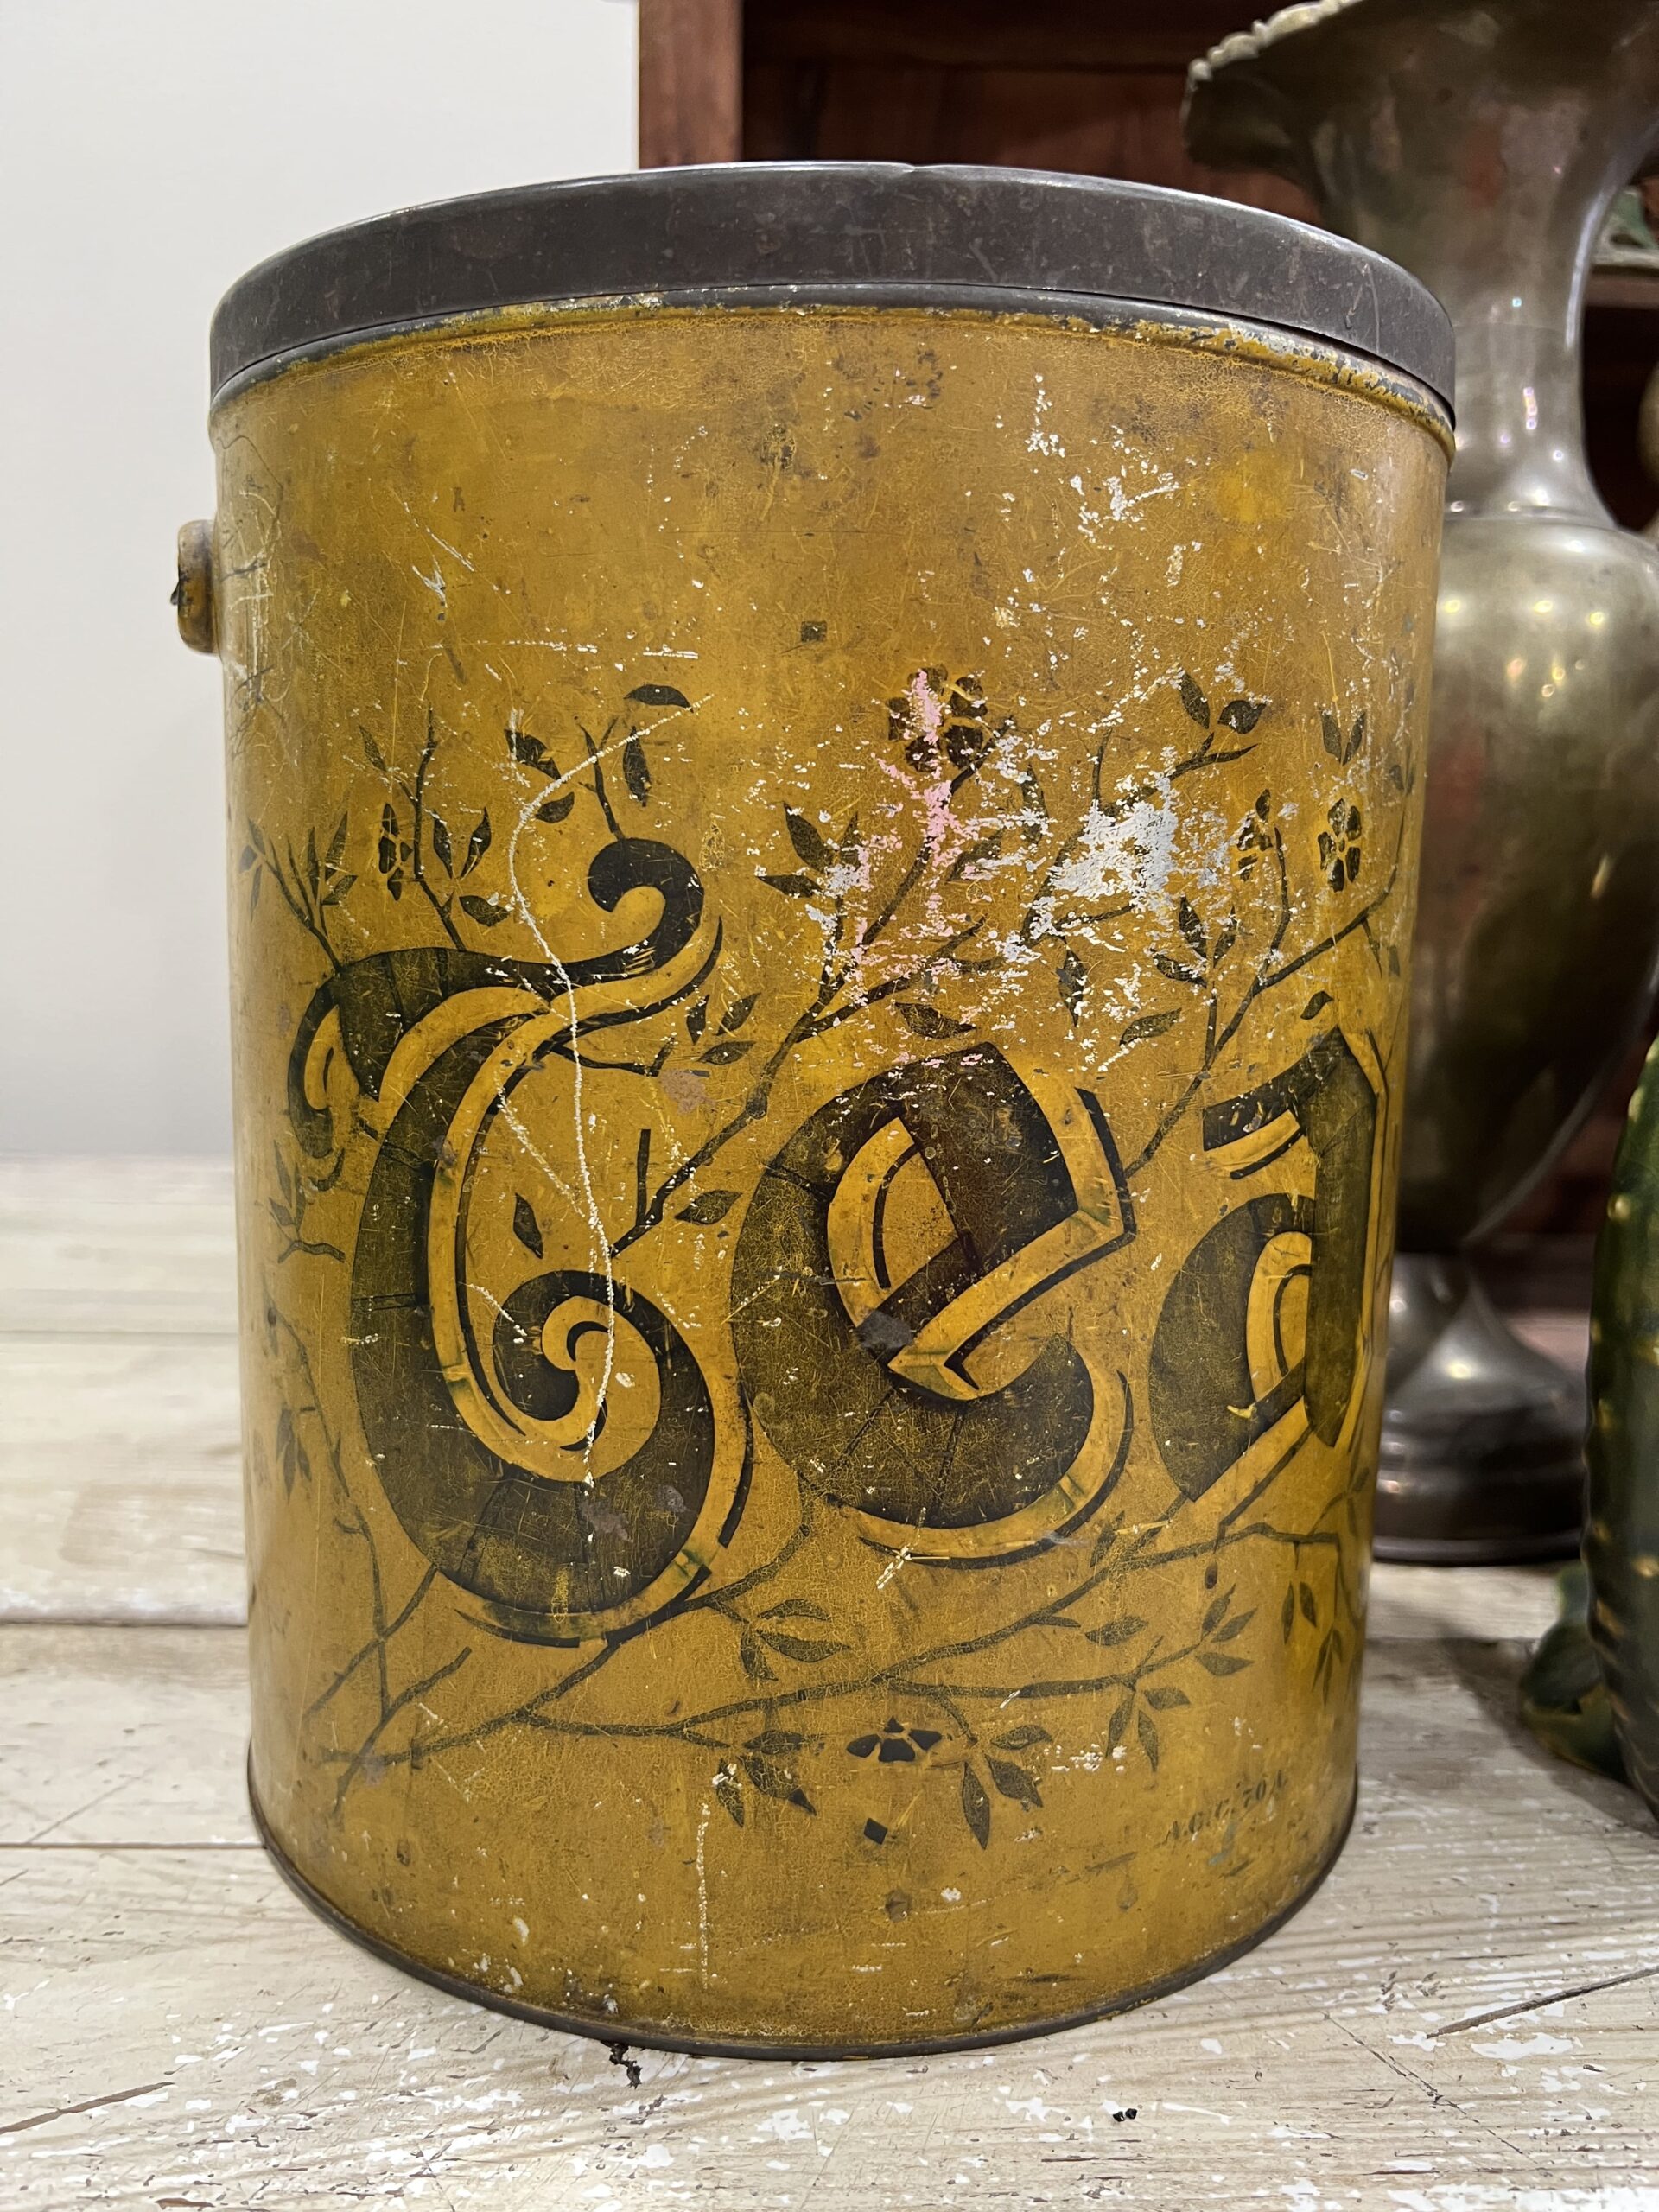 https://thejunkparlor.com/wp-content/uploads/2023/05/antique-tea-tin-cannister-scaled.jpg